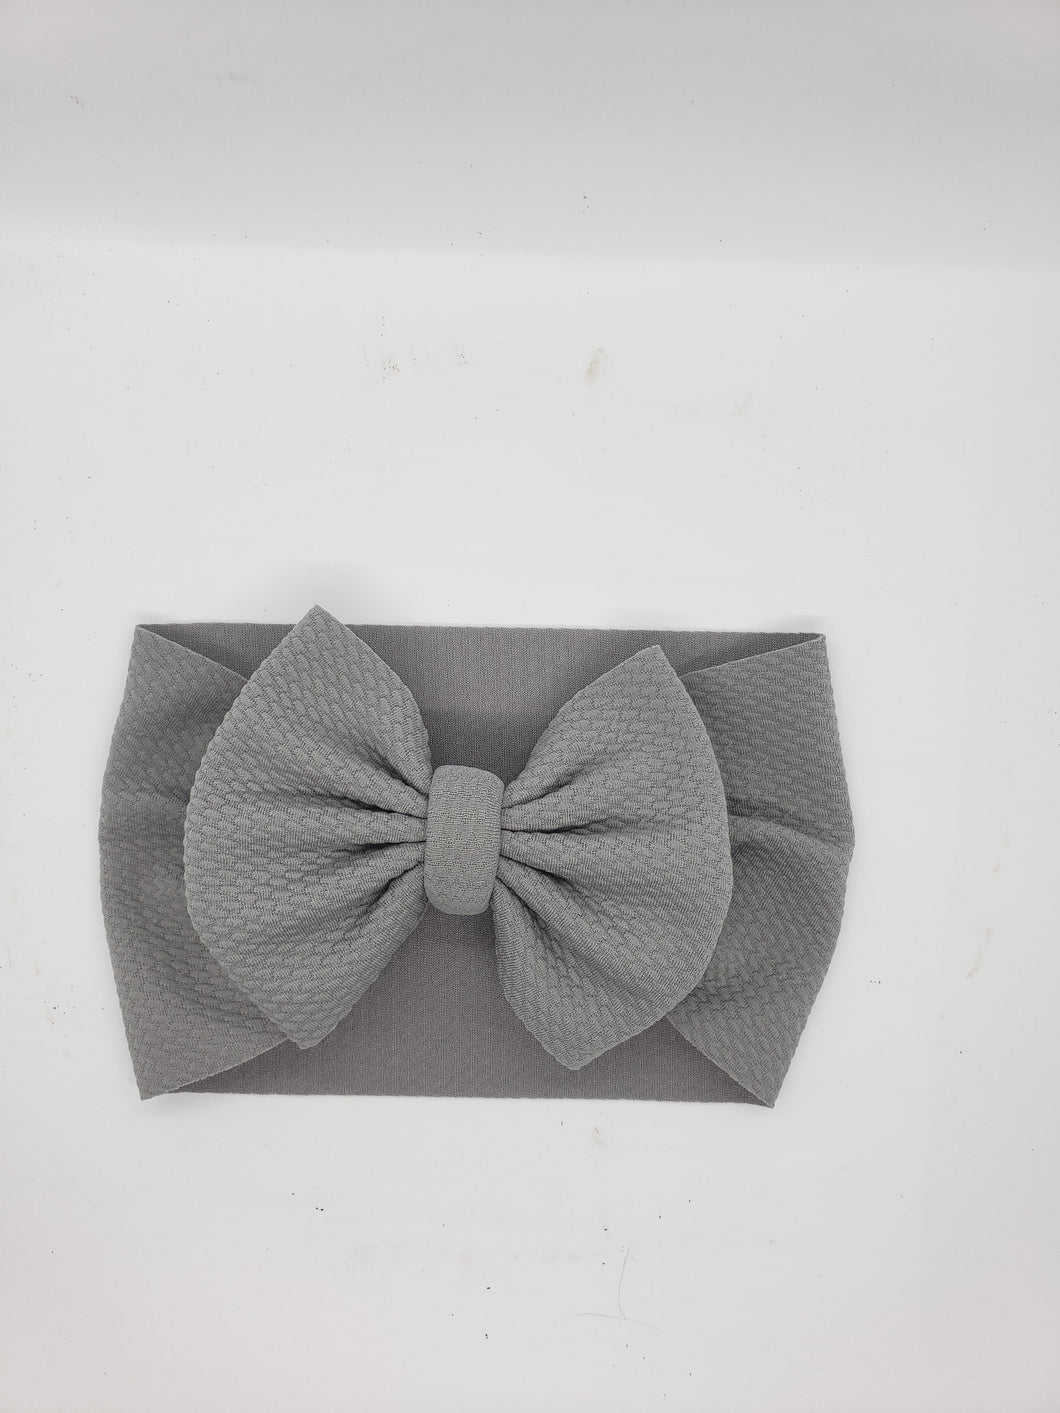 Solid Gray Bows - All Styles and Sizes